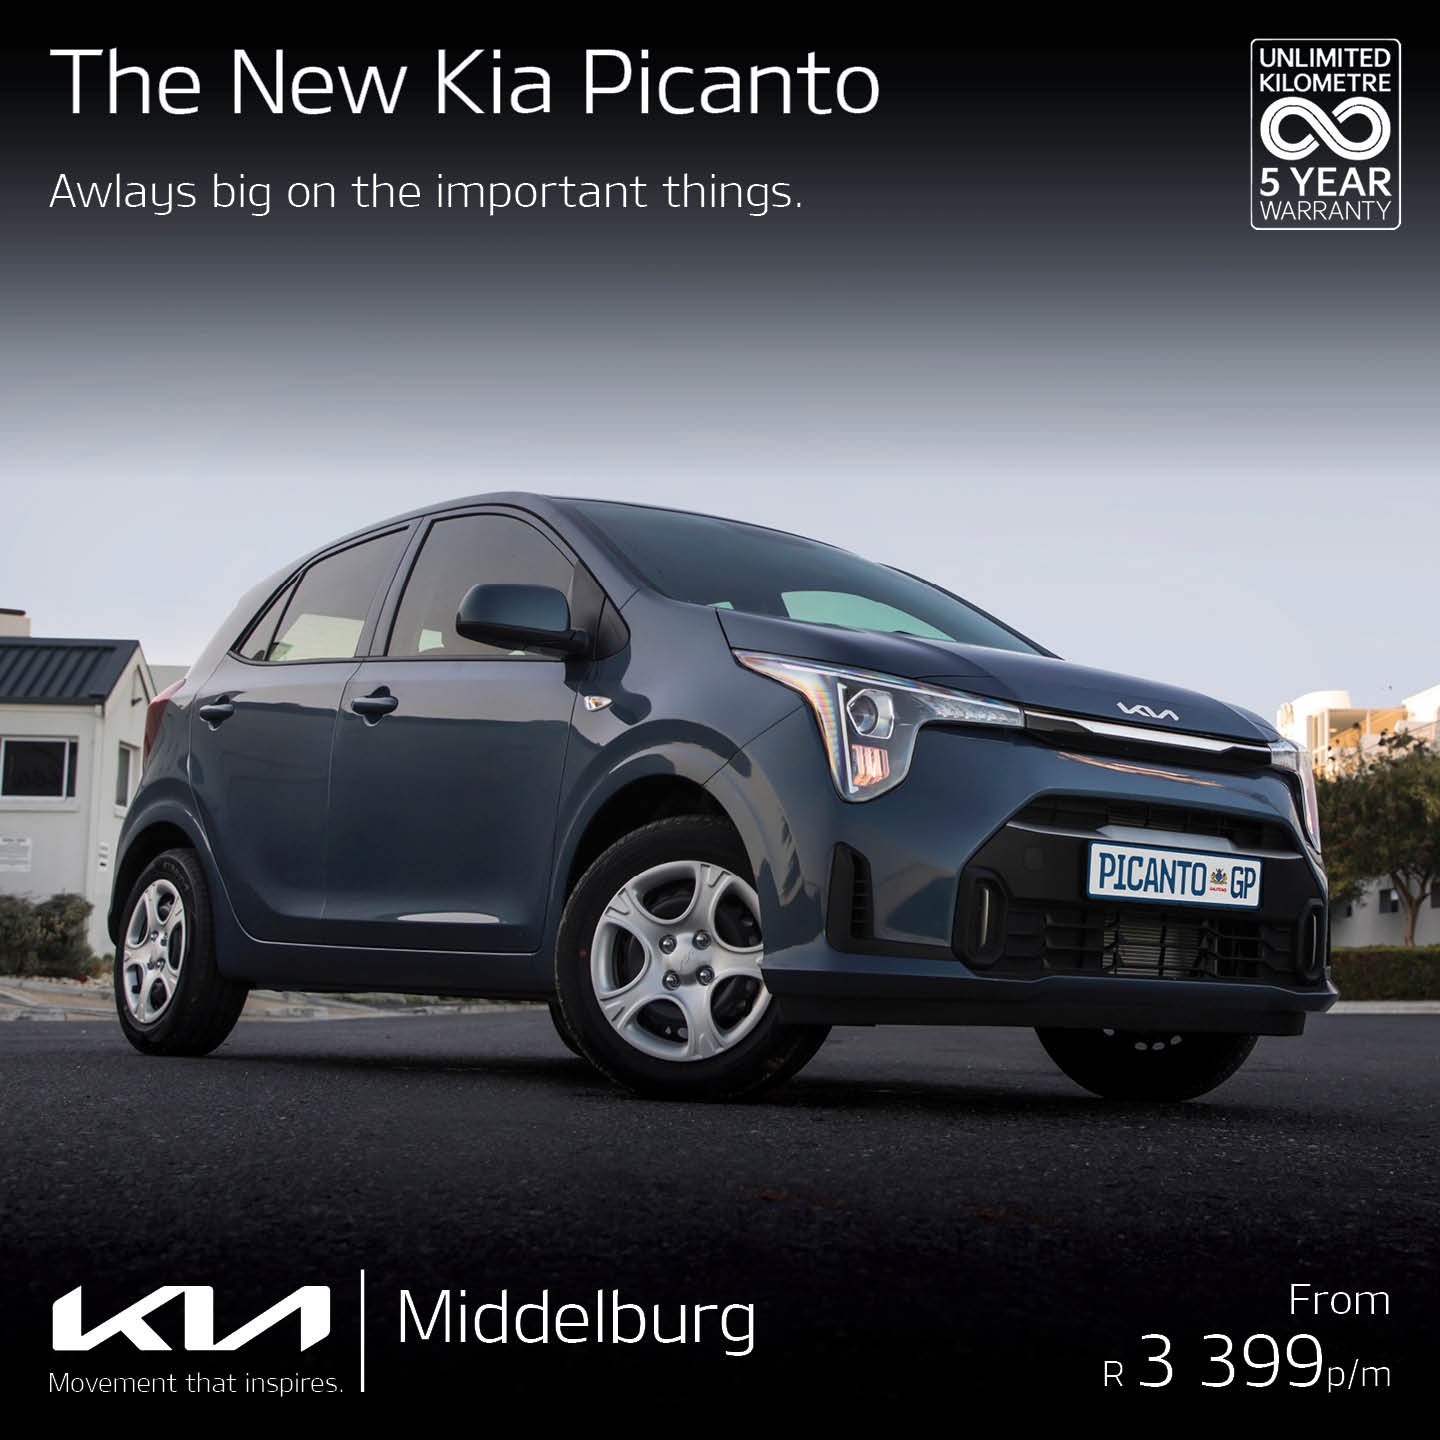 New KIA Picanto image from 